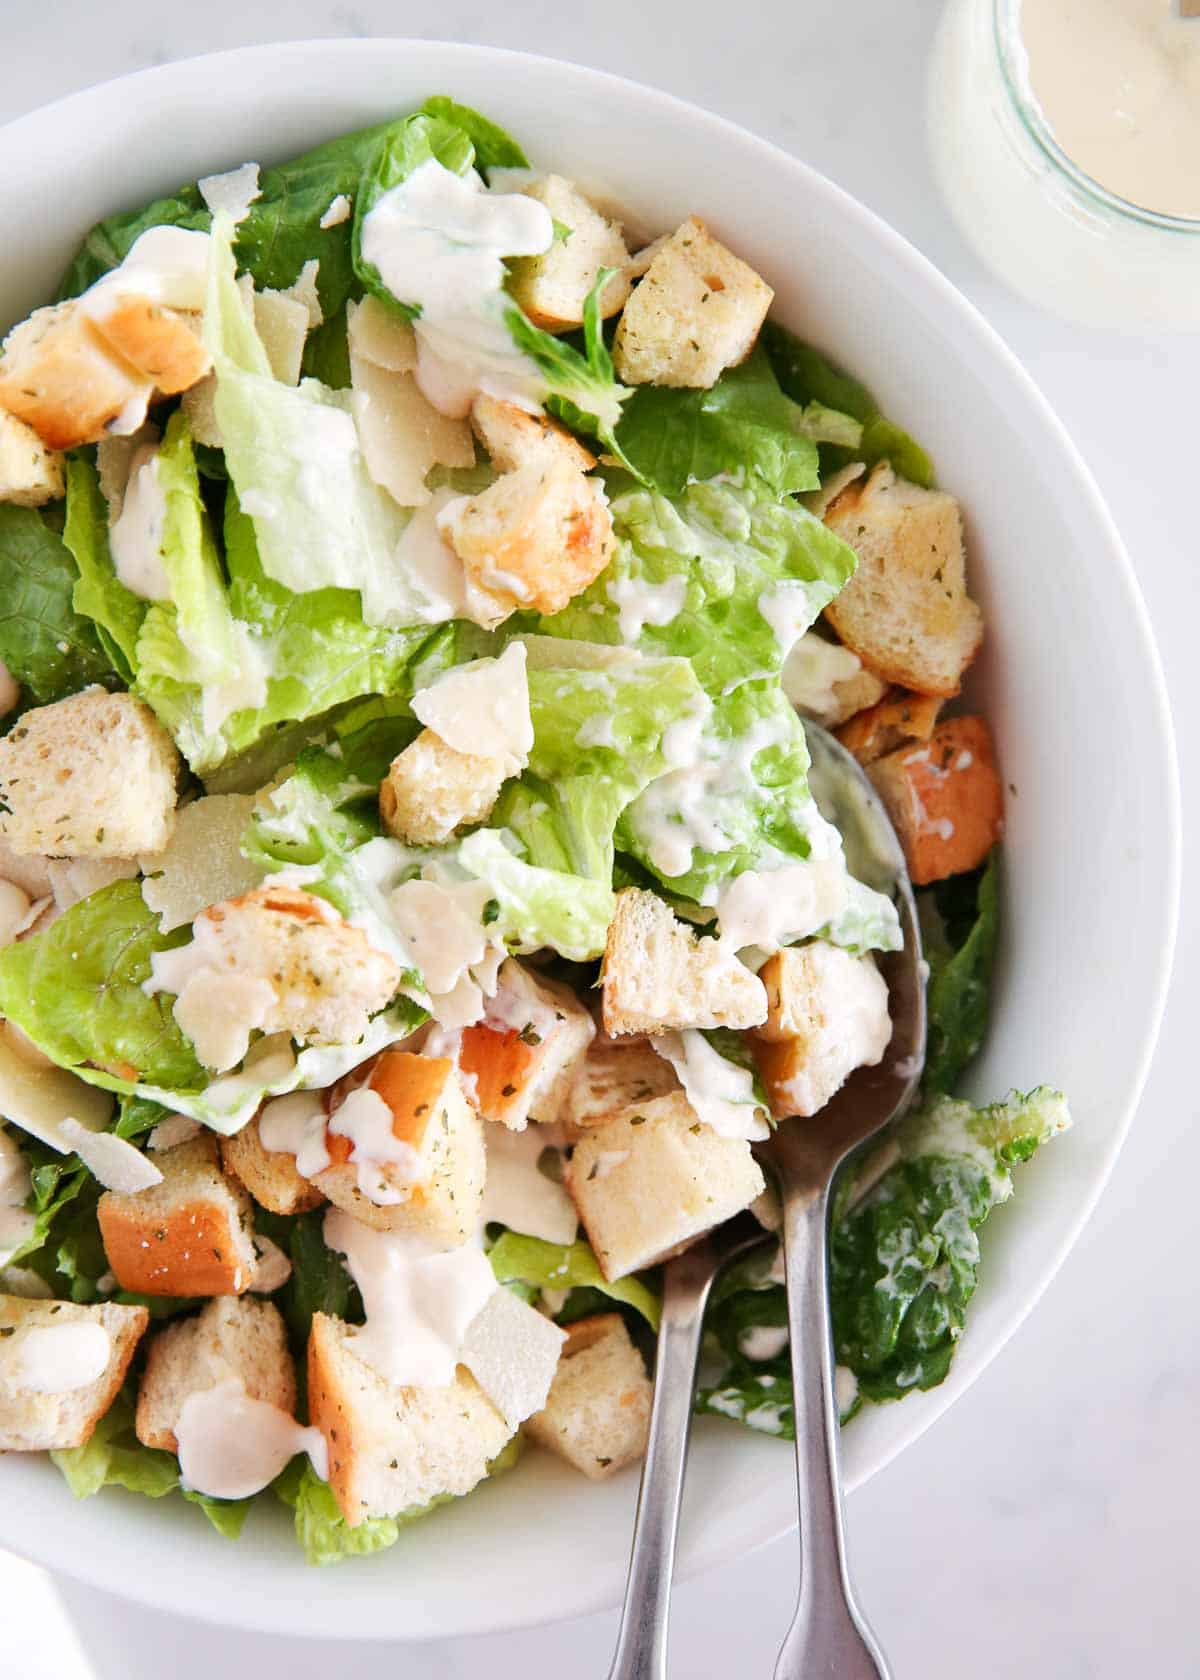 Caesar salad in a white bowl with croutons and parmesan.